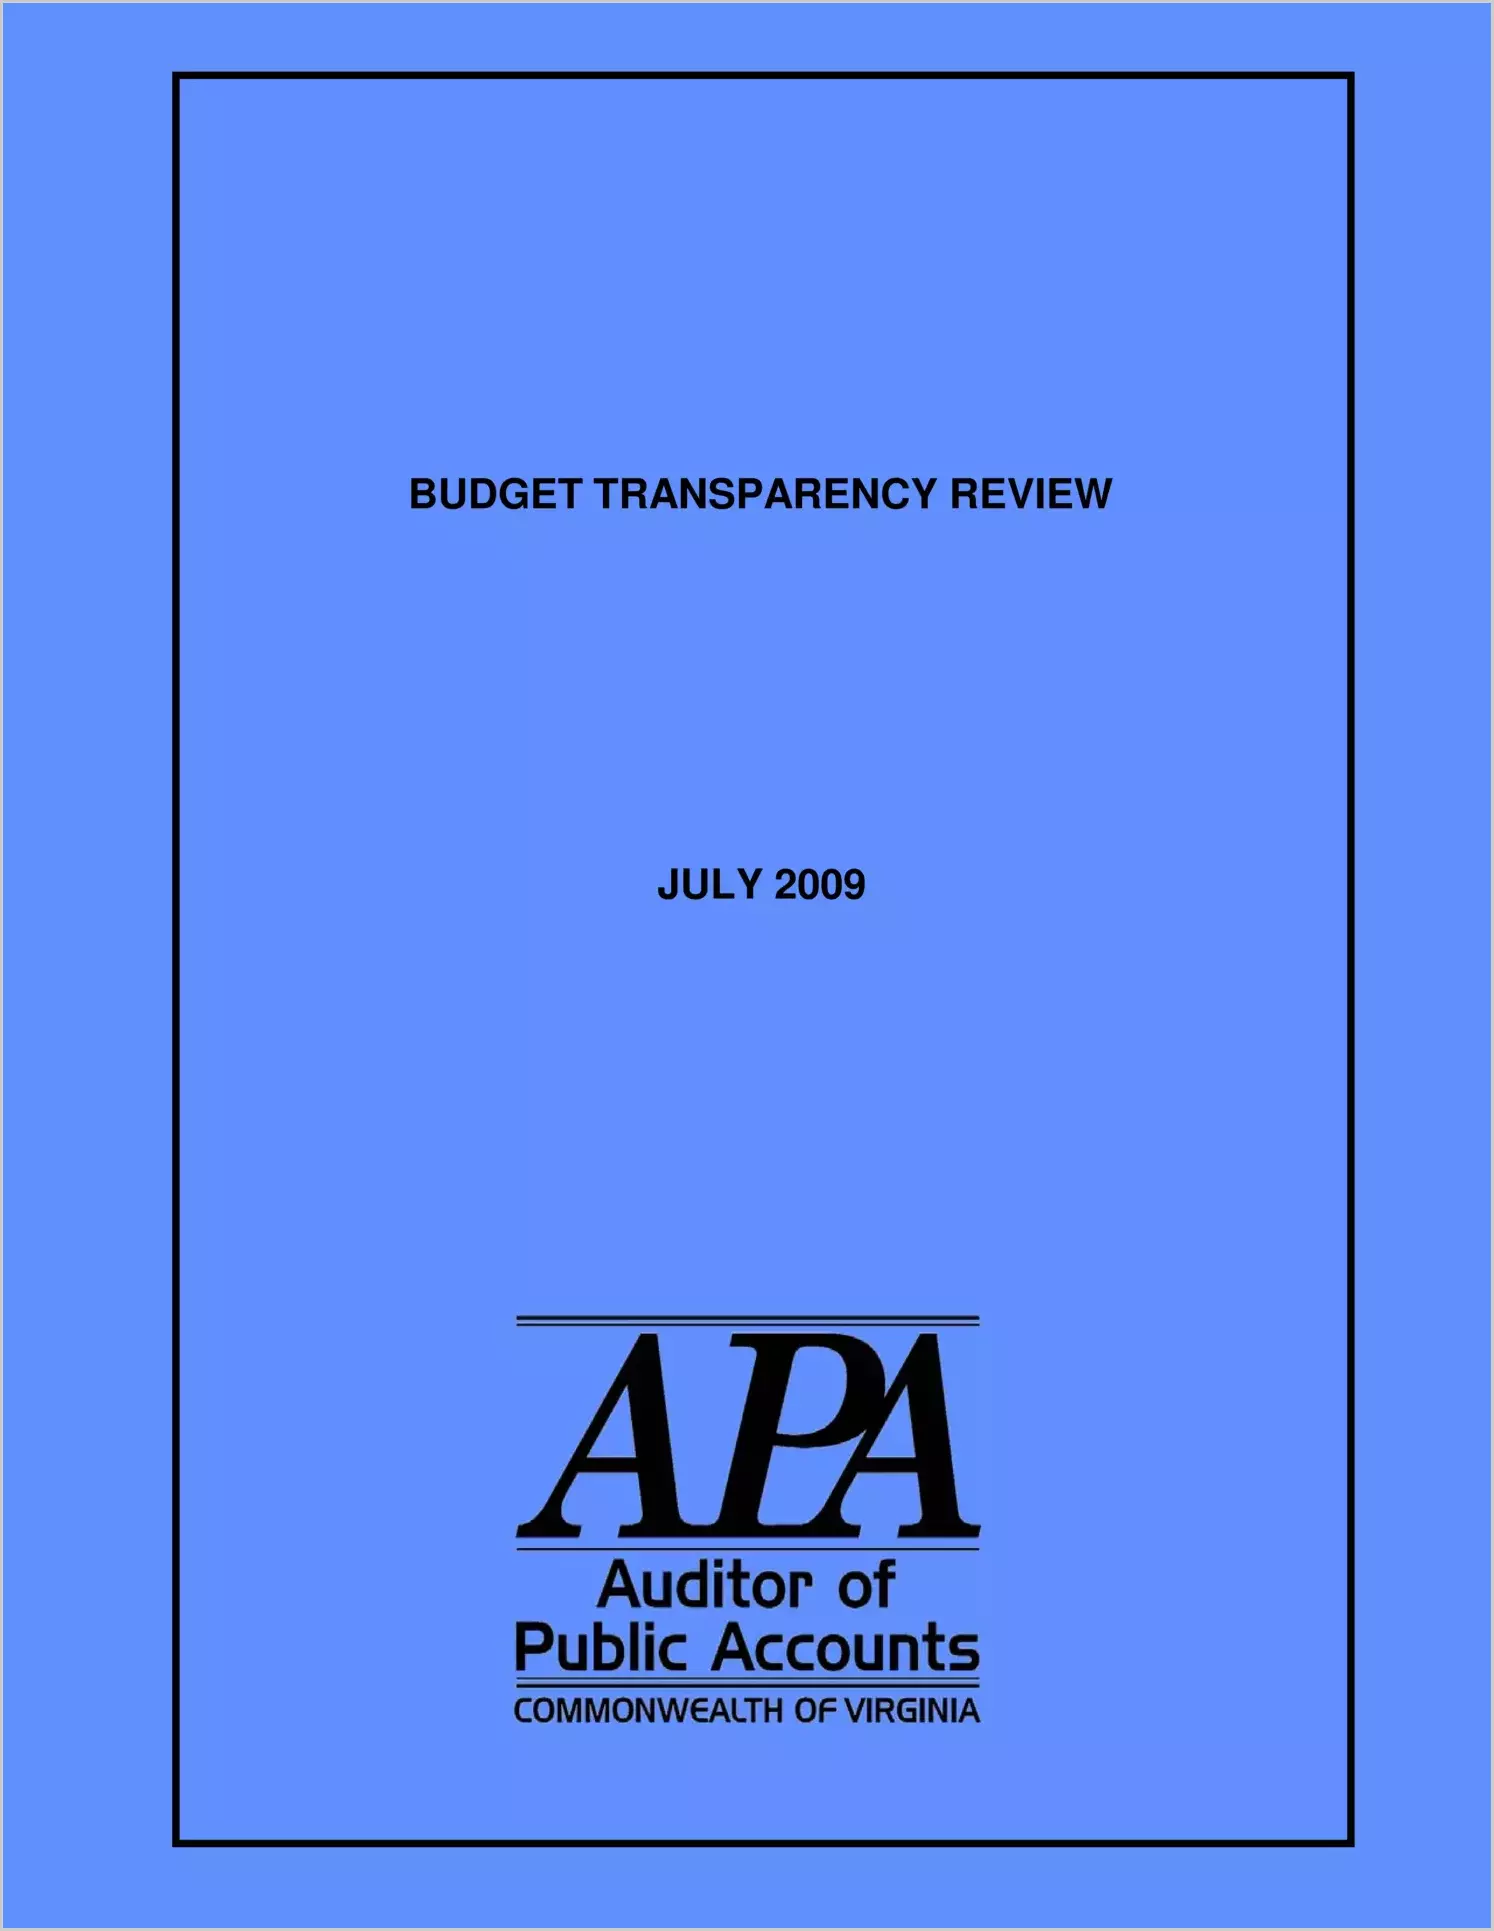 Budget Transparency Review 2009